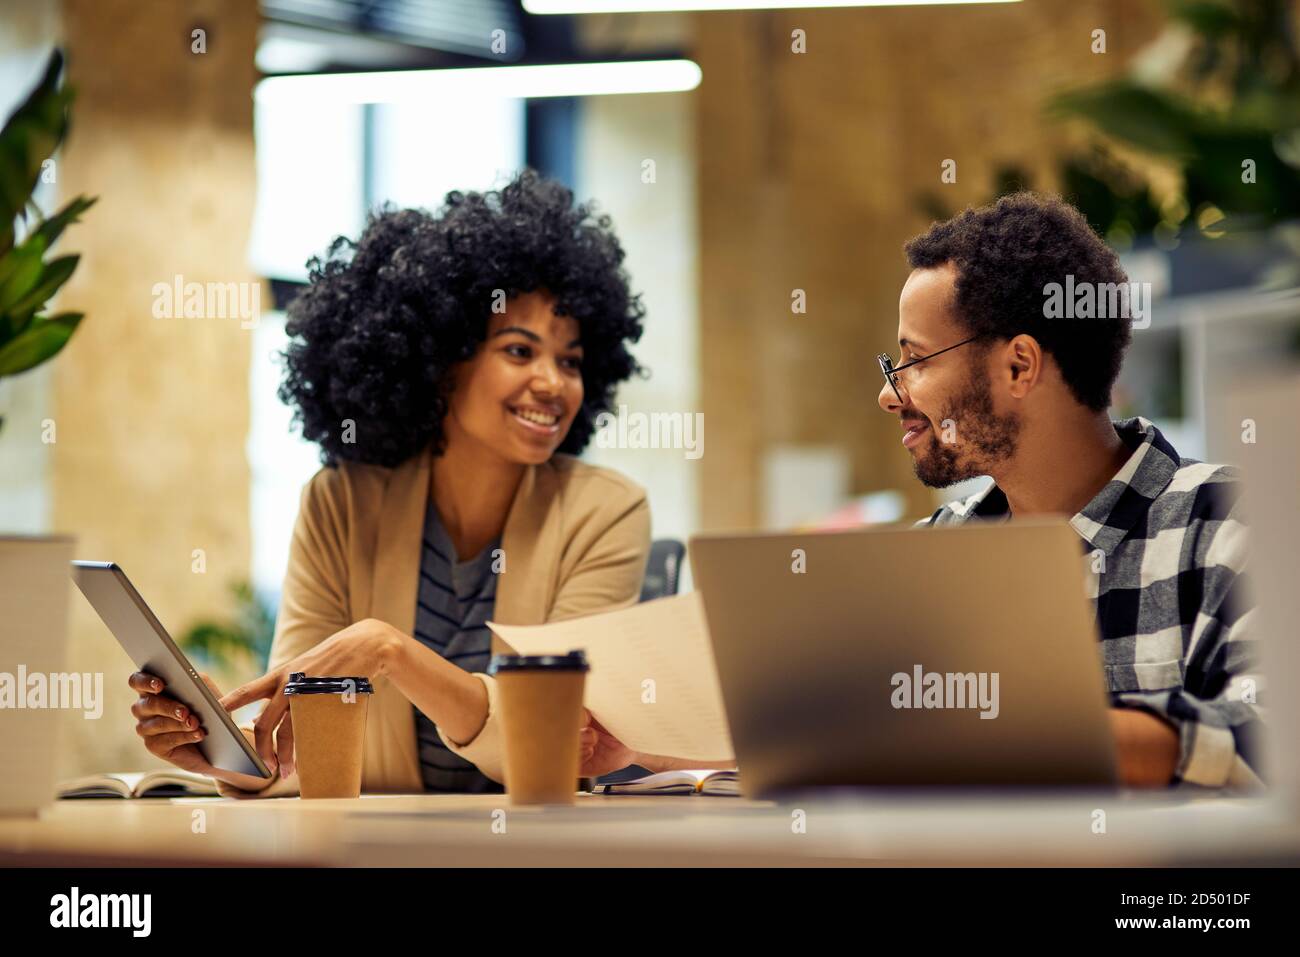 Sharing fresh ideas. Two young happy multiracial business people sitting at desk and communicating while working together in coworking space. Office life, teamwork and business Stock Photo